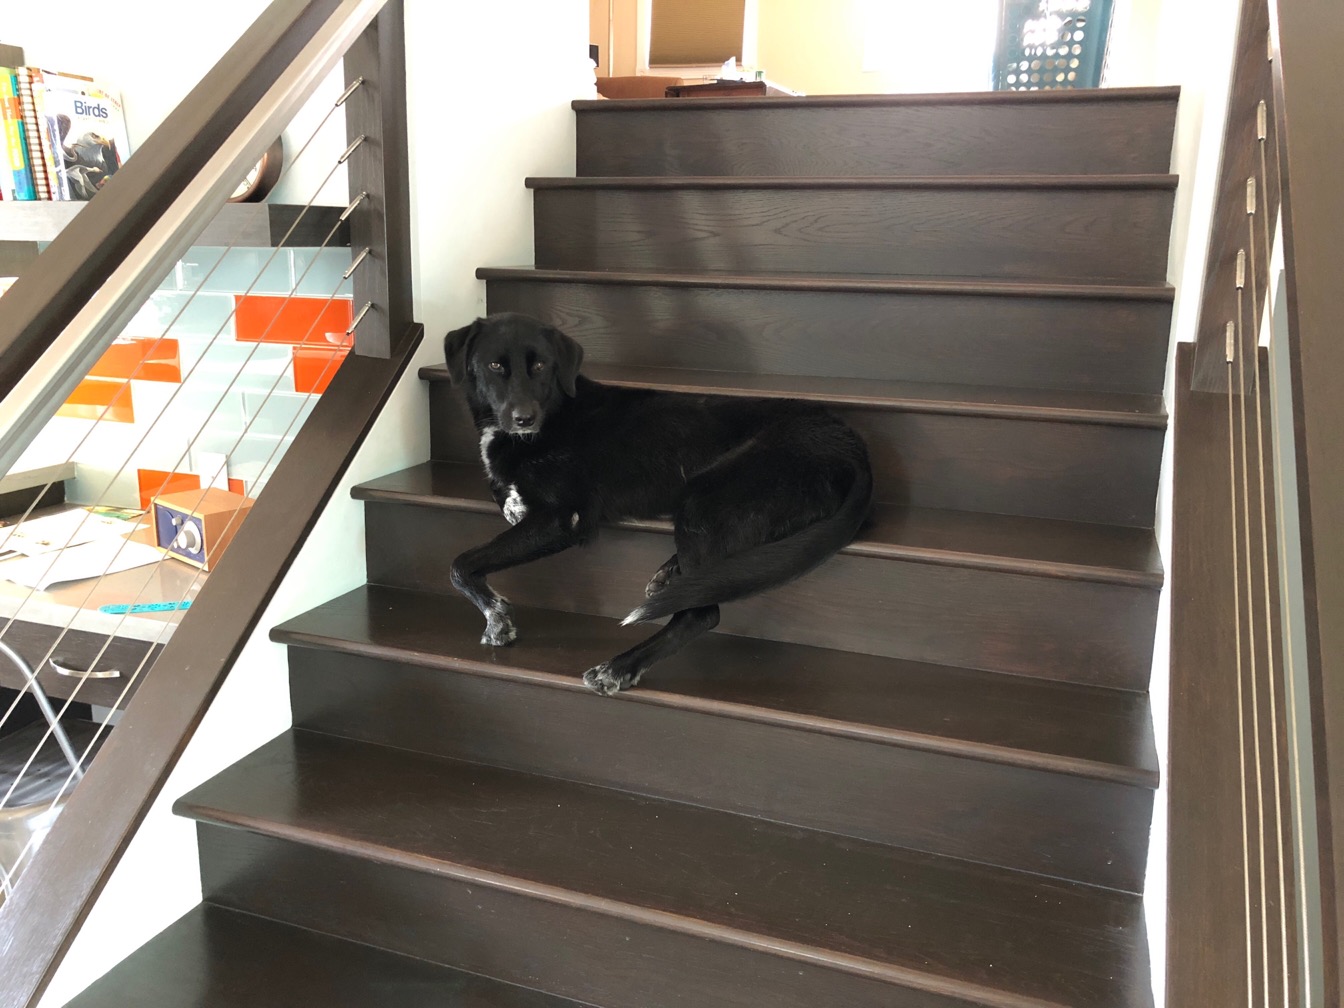 Photo of a black dog laying on a staircase.  